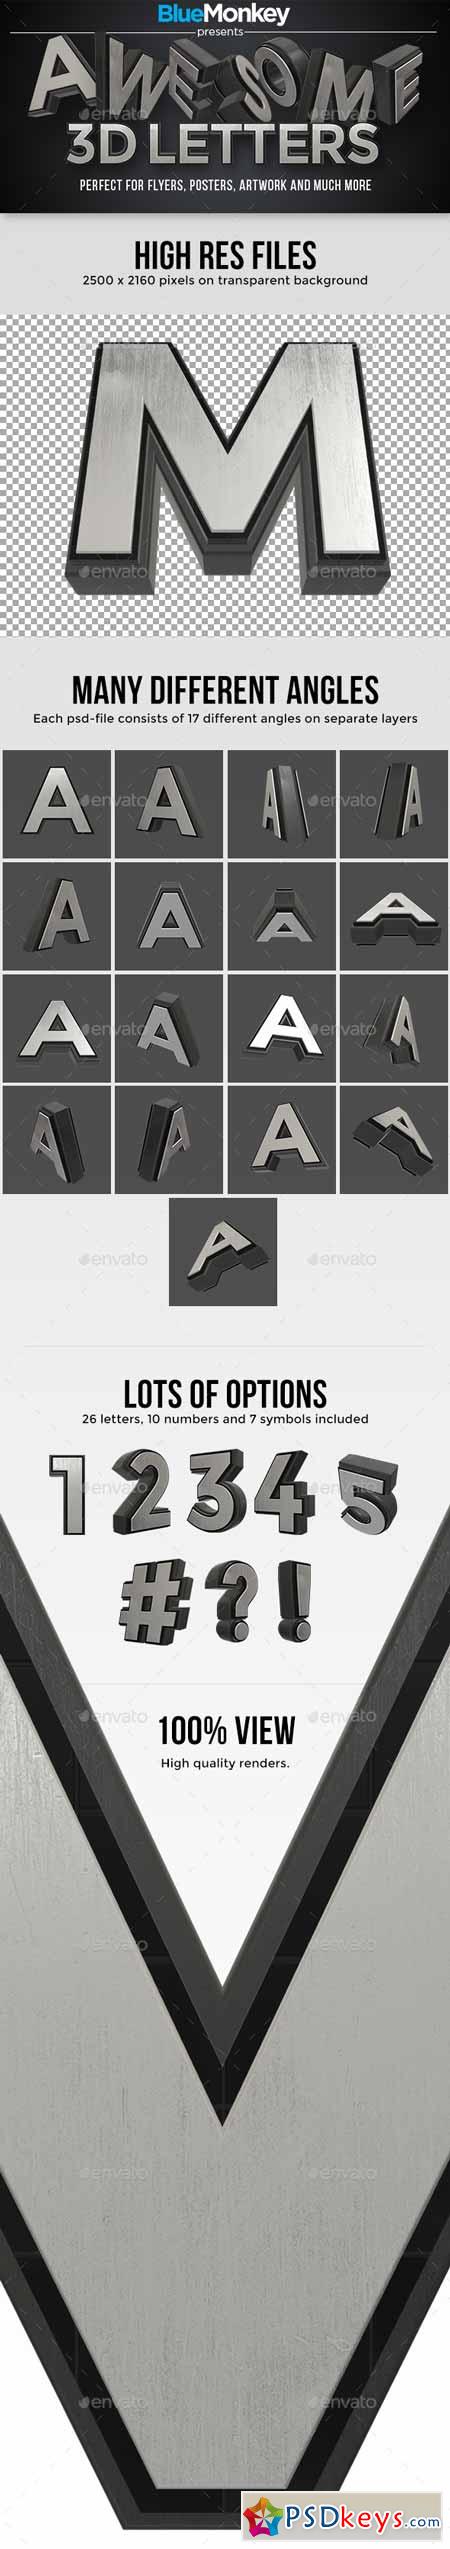 Awesome 3D letters 14374622